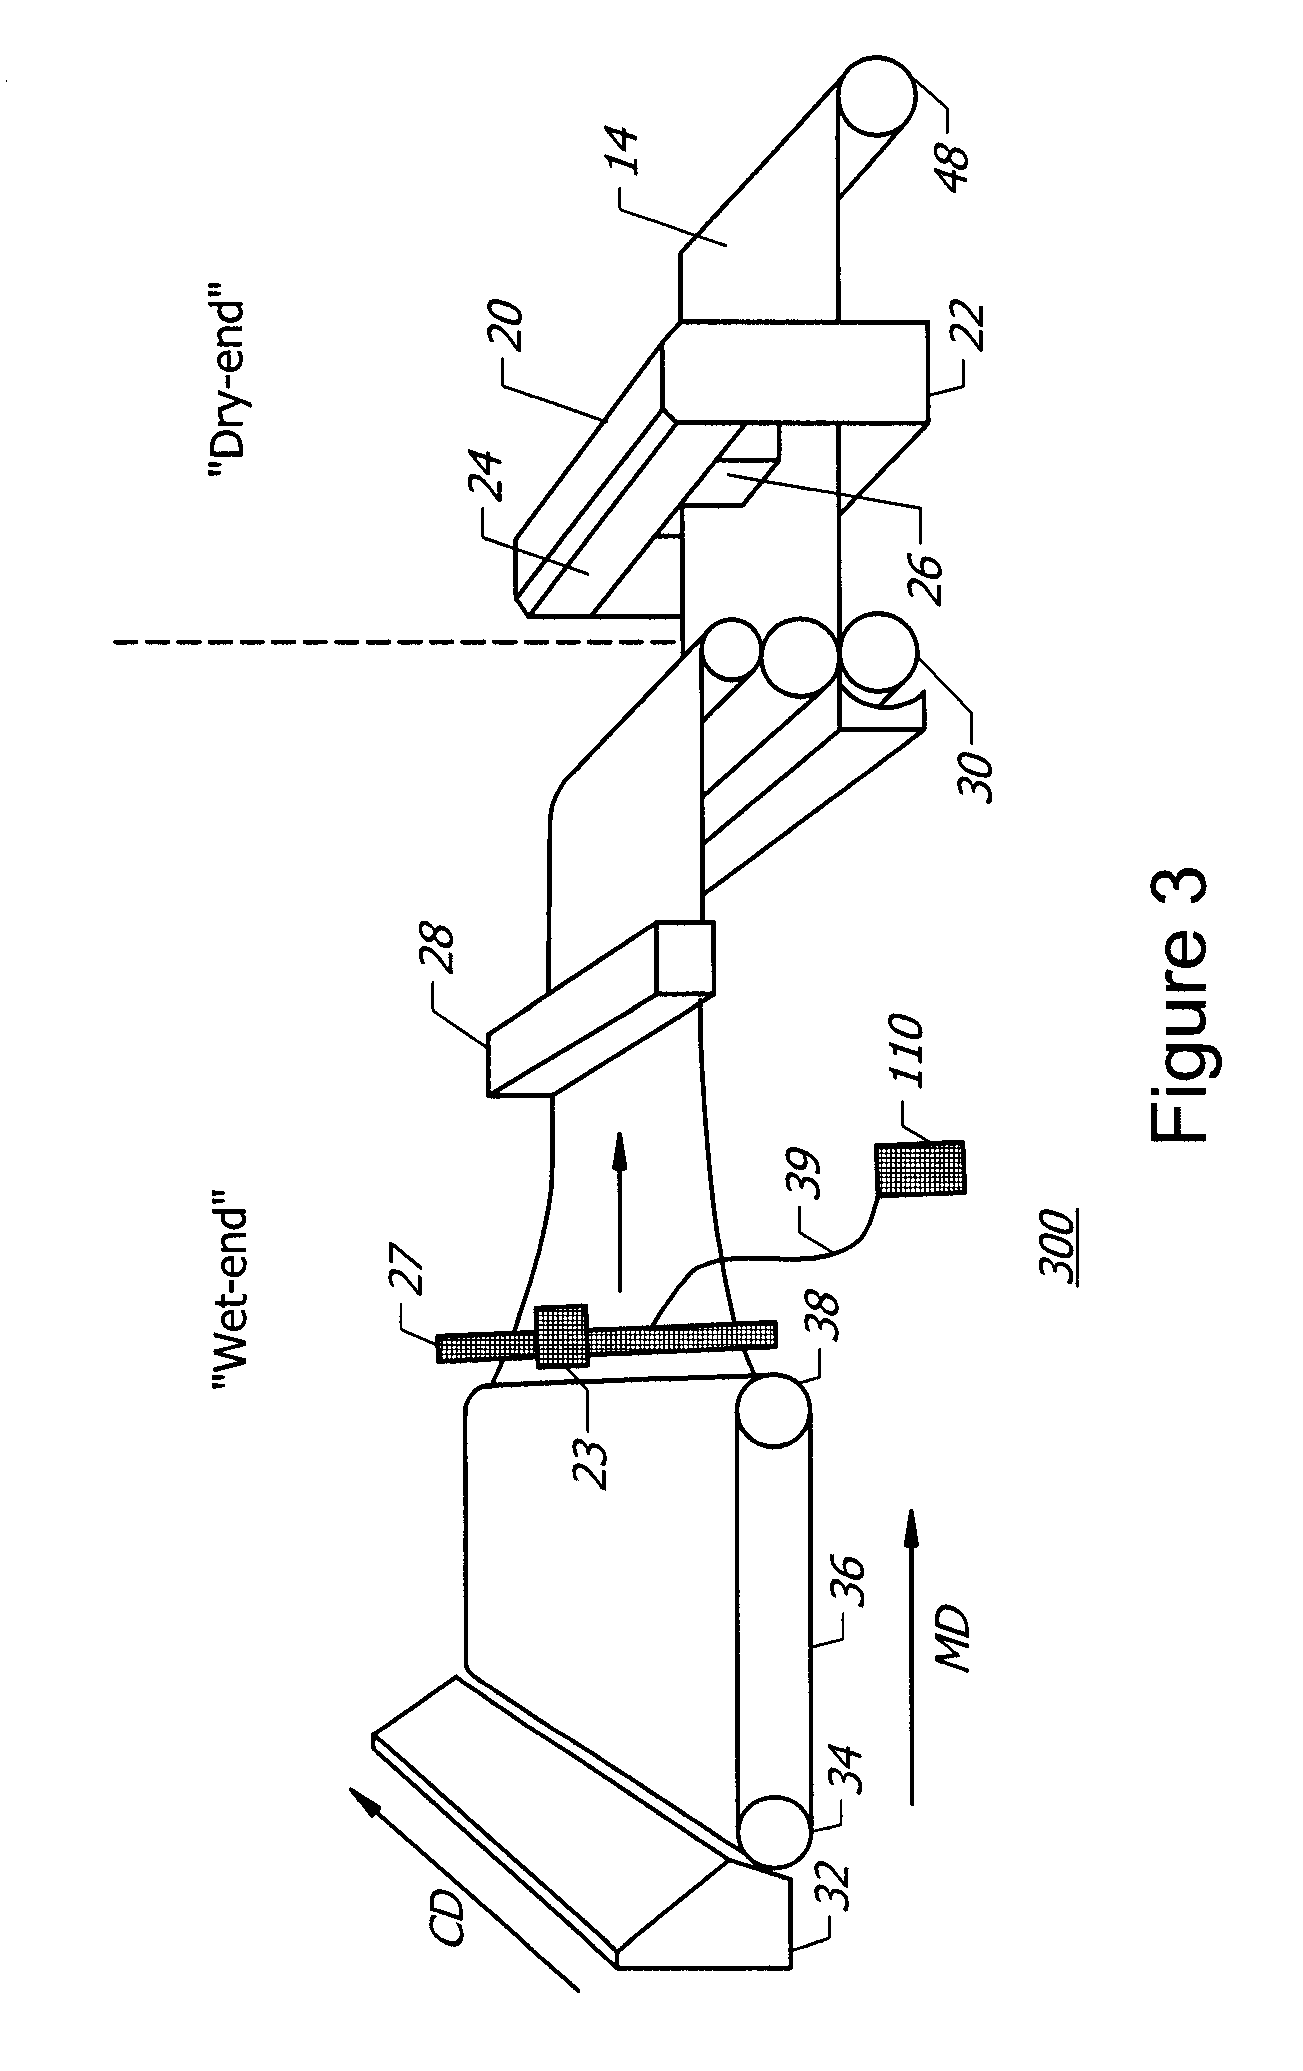 Material measurement system for obtaining coincident properties and related method